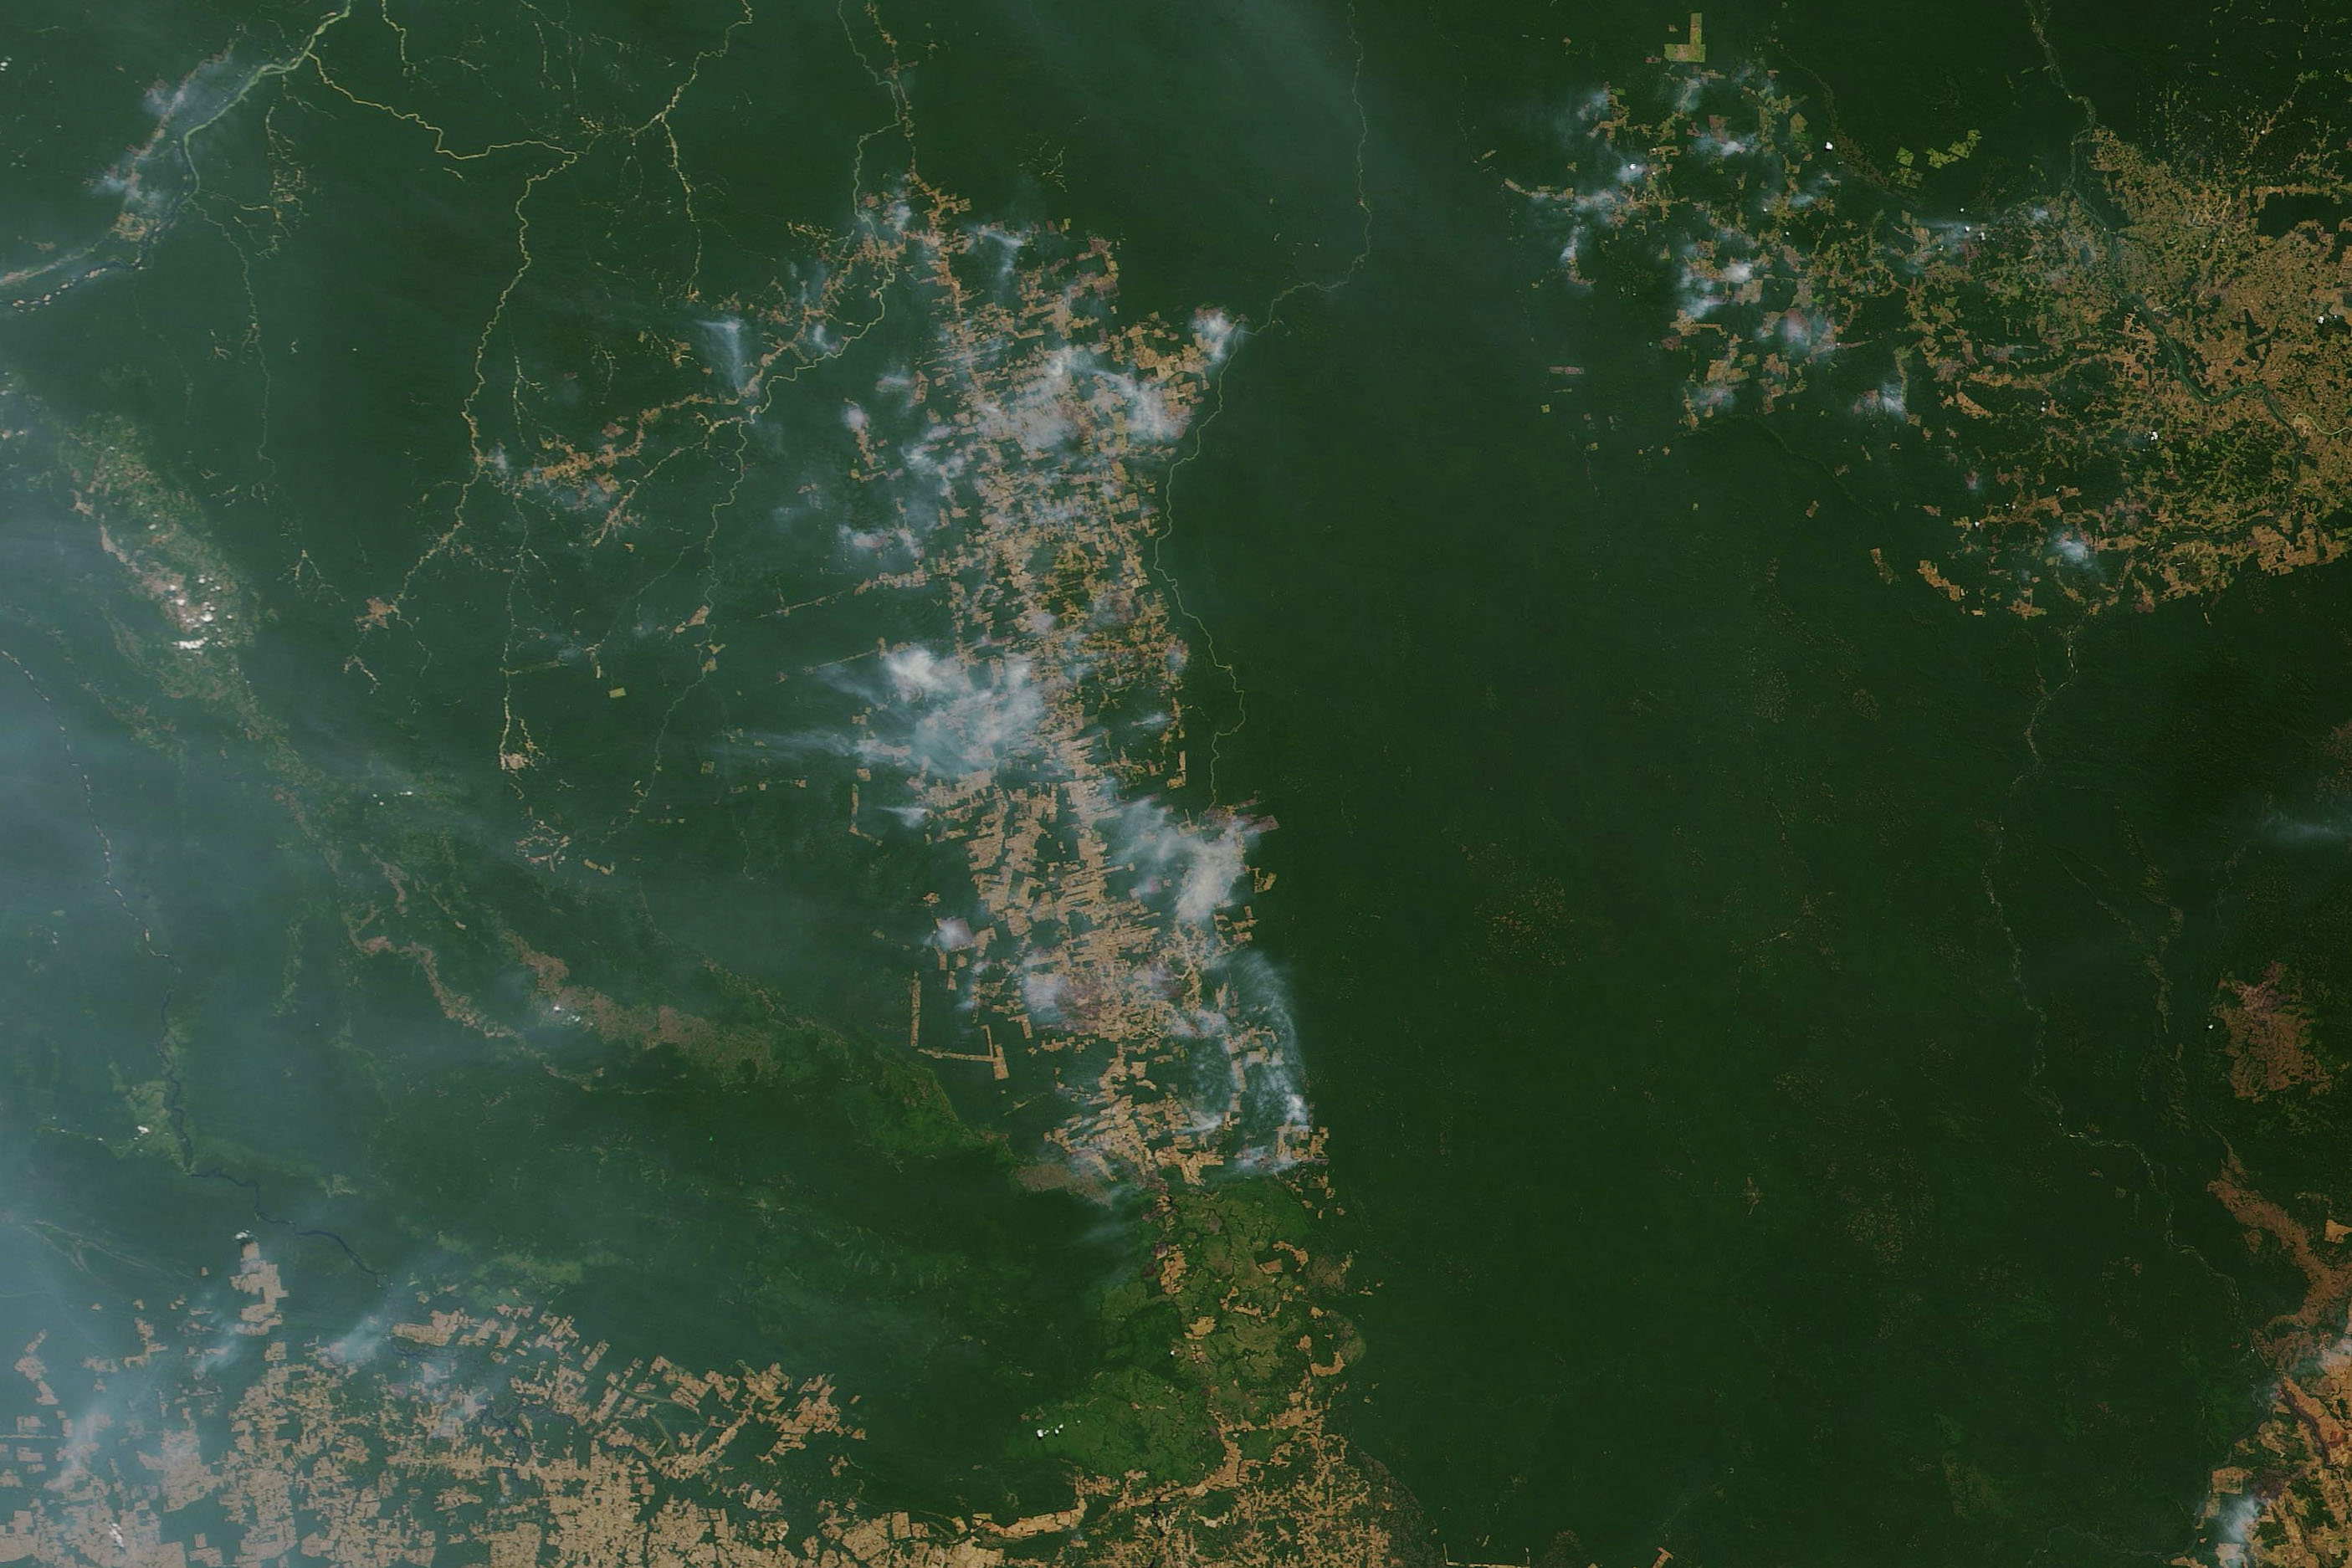 Satellite image shows smoke rising from edges of large patches of green land